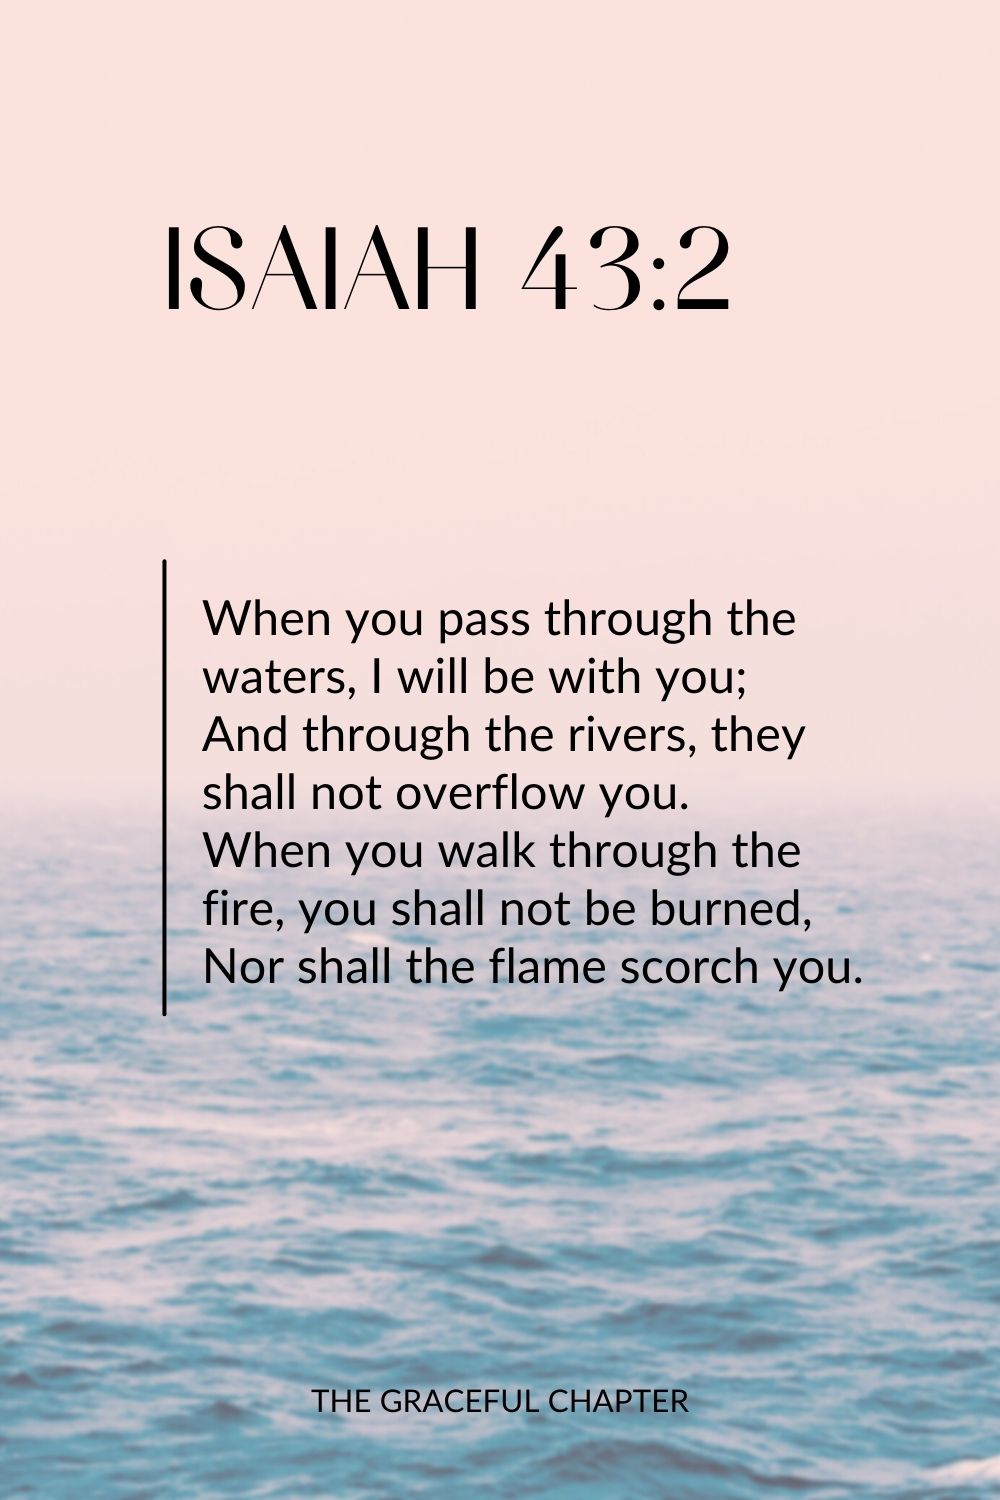 When you pass through the waters, I will be with you; And through the rivers, they shall not overflow you. When you walk through the fire, you shall not be burned, Nor shall the flame scorch you. Isaiah 43:2